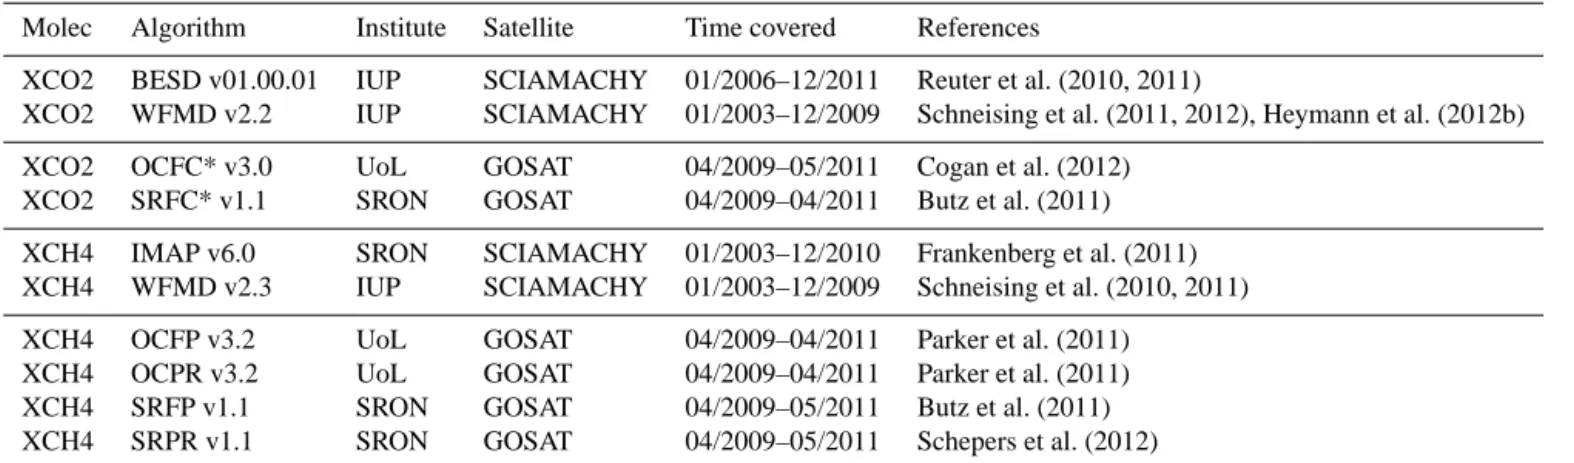 Table 1. List of all GHG-CCI algorithms inter-compared in this study, their time coverage and references.